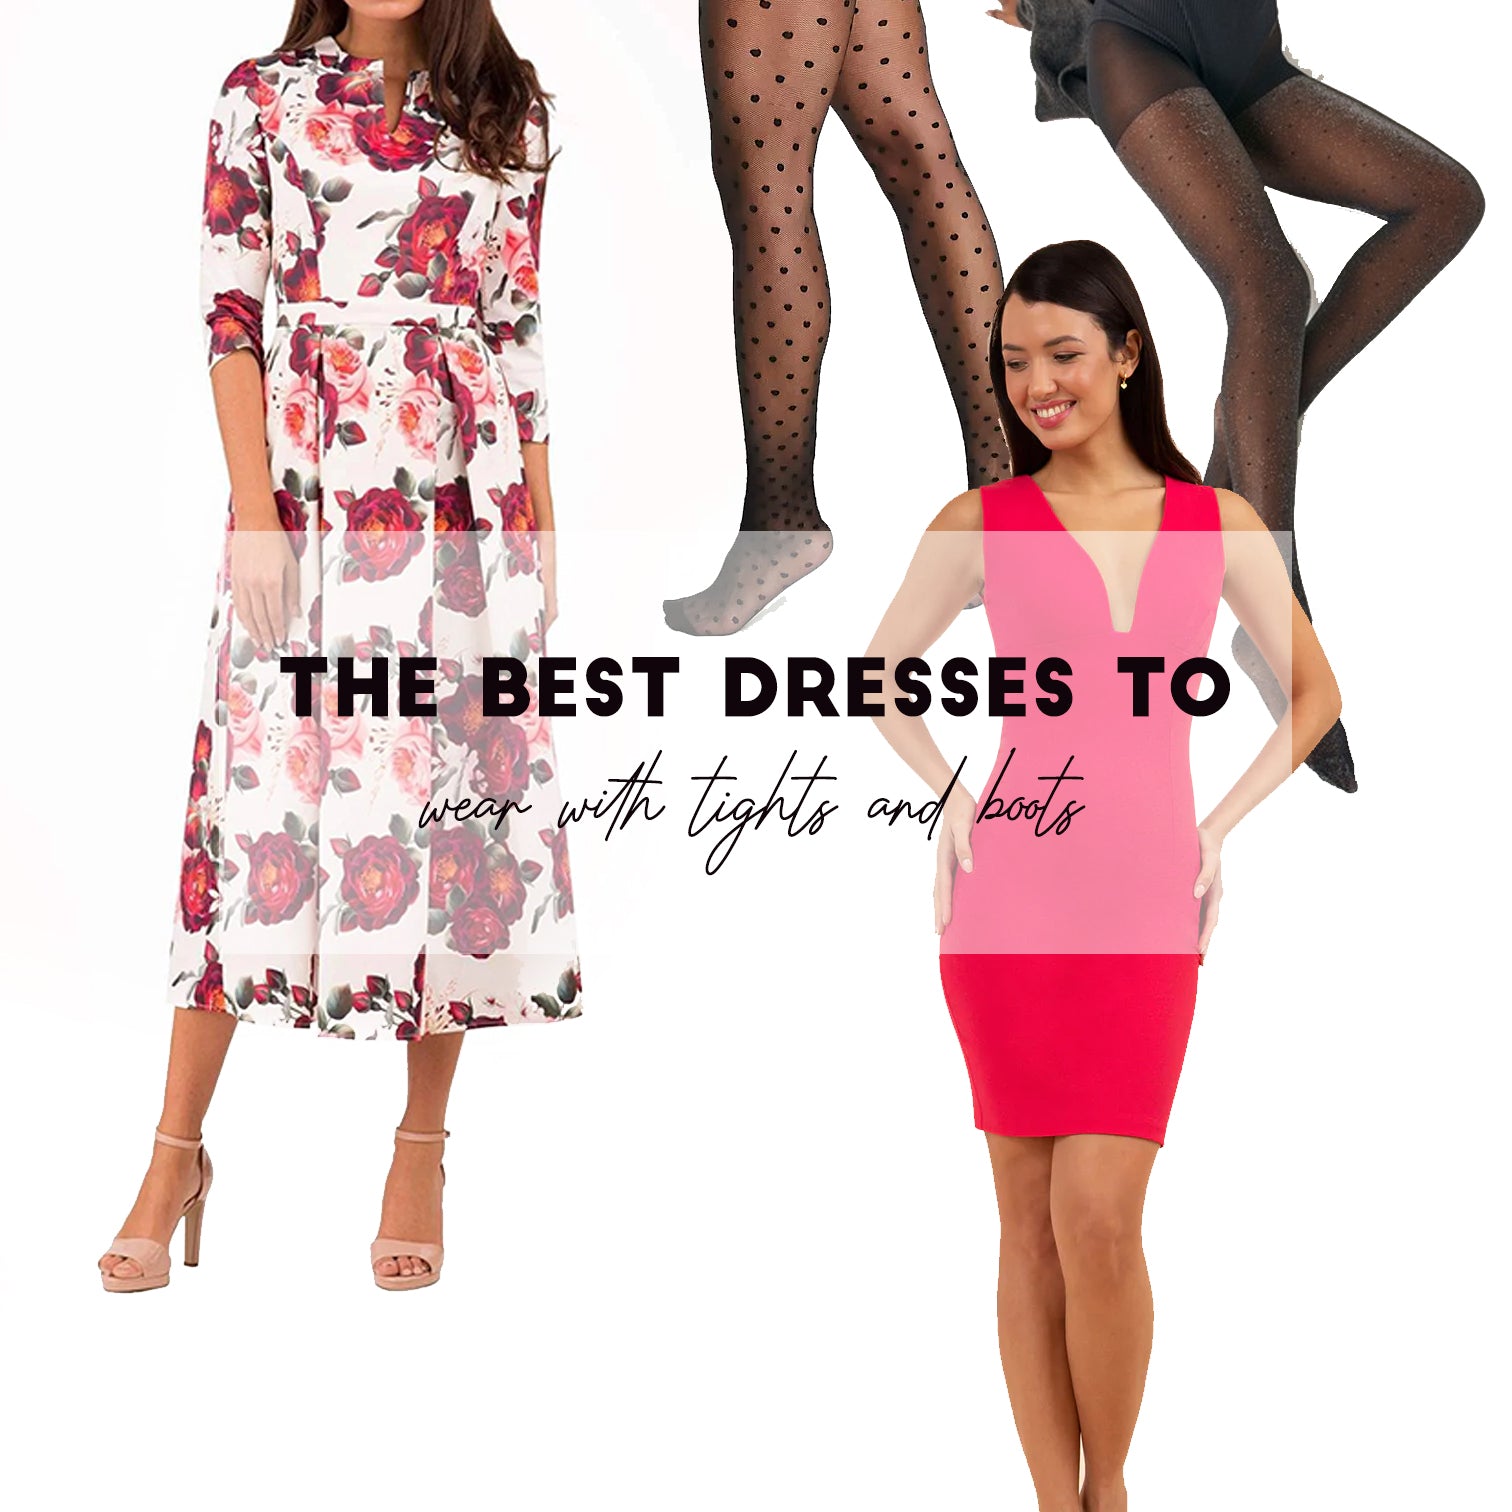 The 11 best dresses to wear with tights - Reviewed